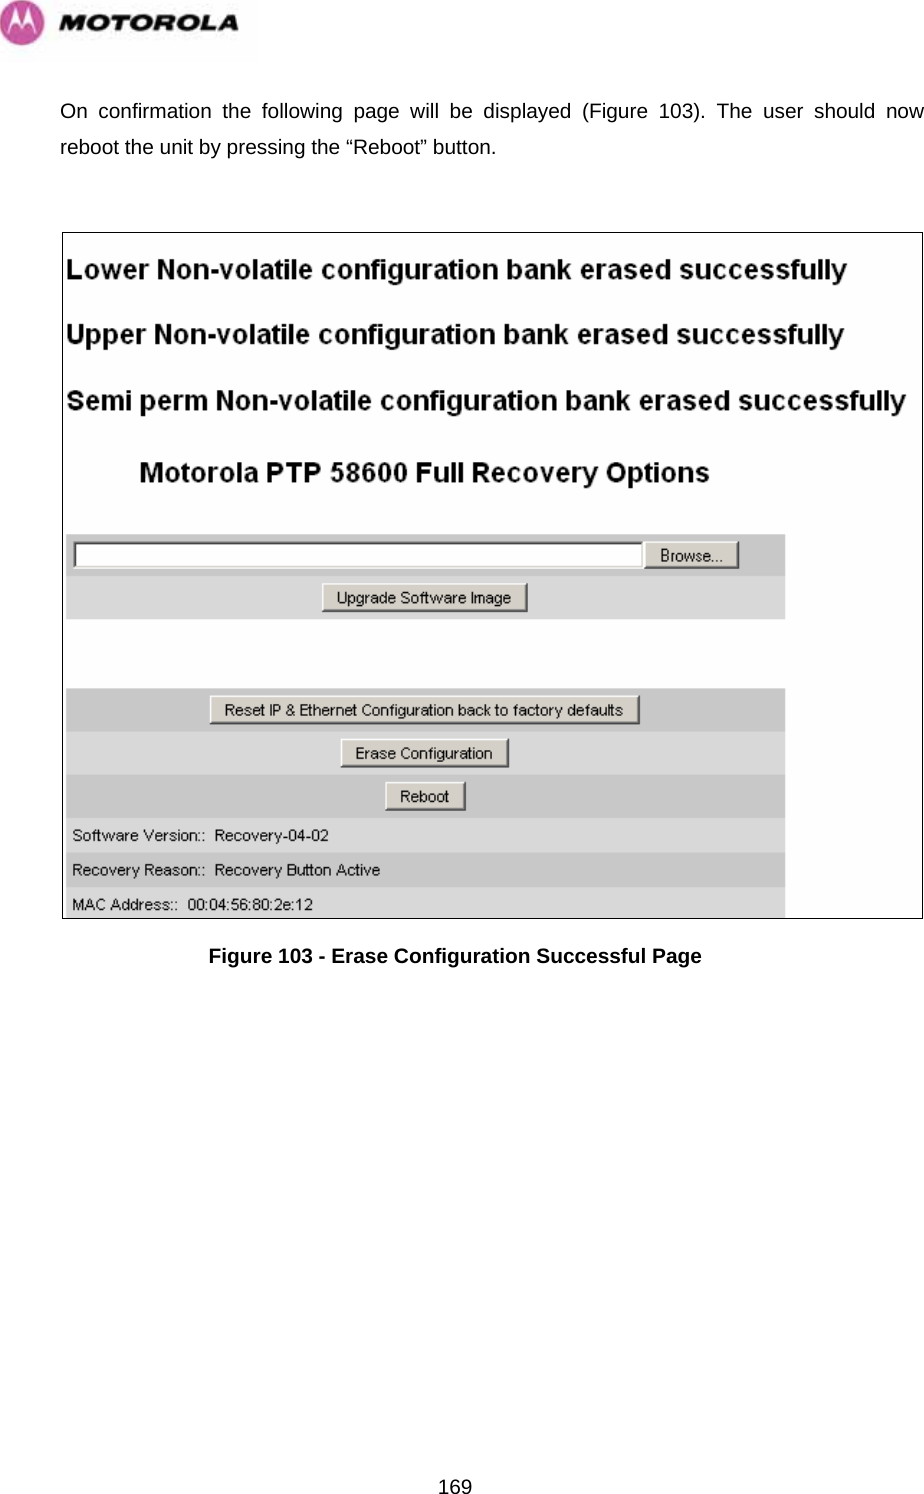   169On confirmation the following page will be displayed (Figure 103). The user should now reboot the unit by pressing the “Reboot” button.   Figure 103 - Erase Configuration Successful Page 